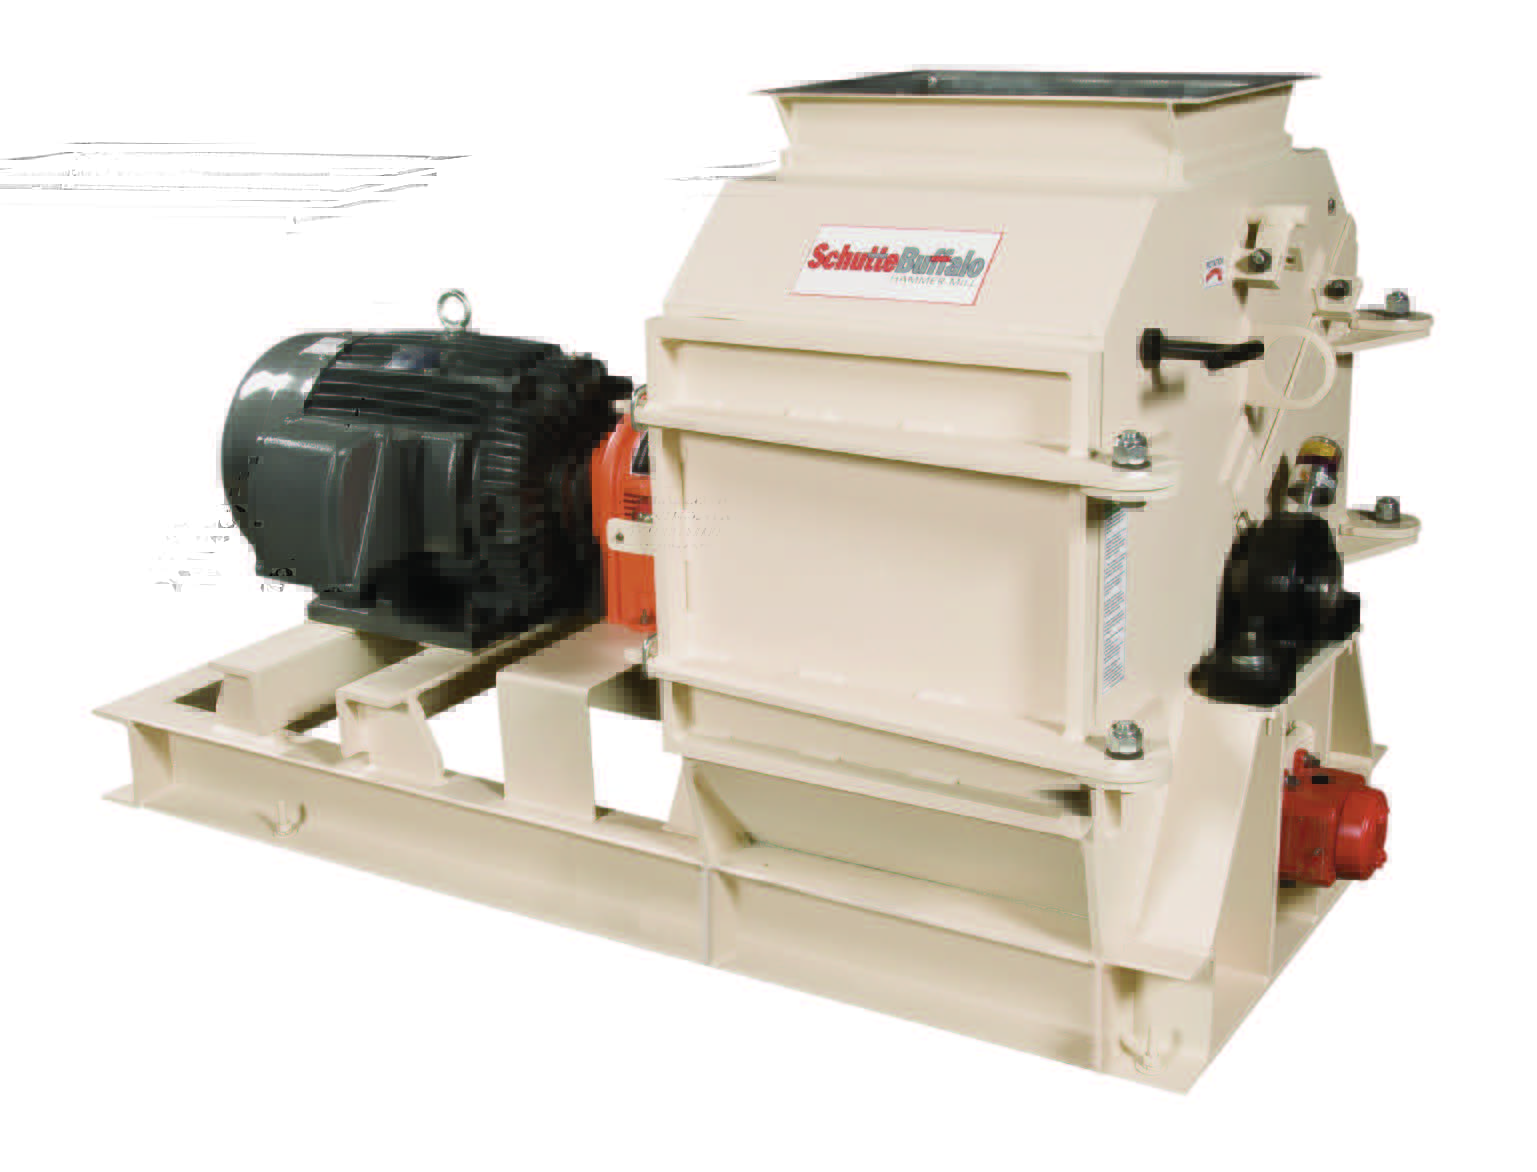 Industrial grain milling machine with a large motor and several mechanical components, mounted on a metal frame.